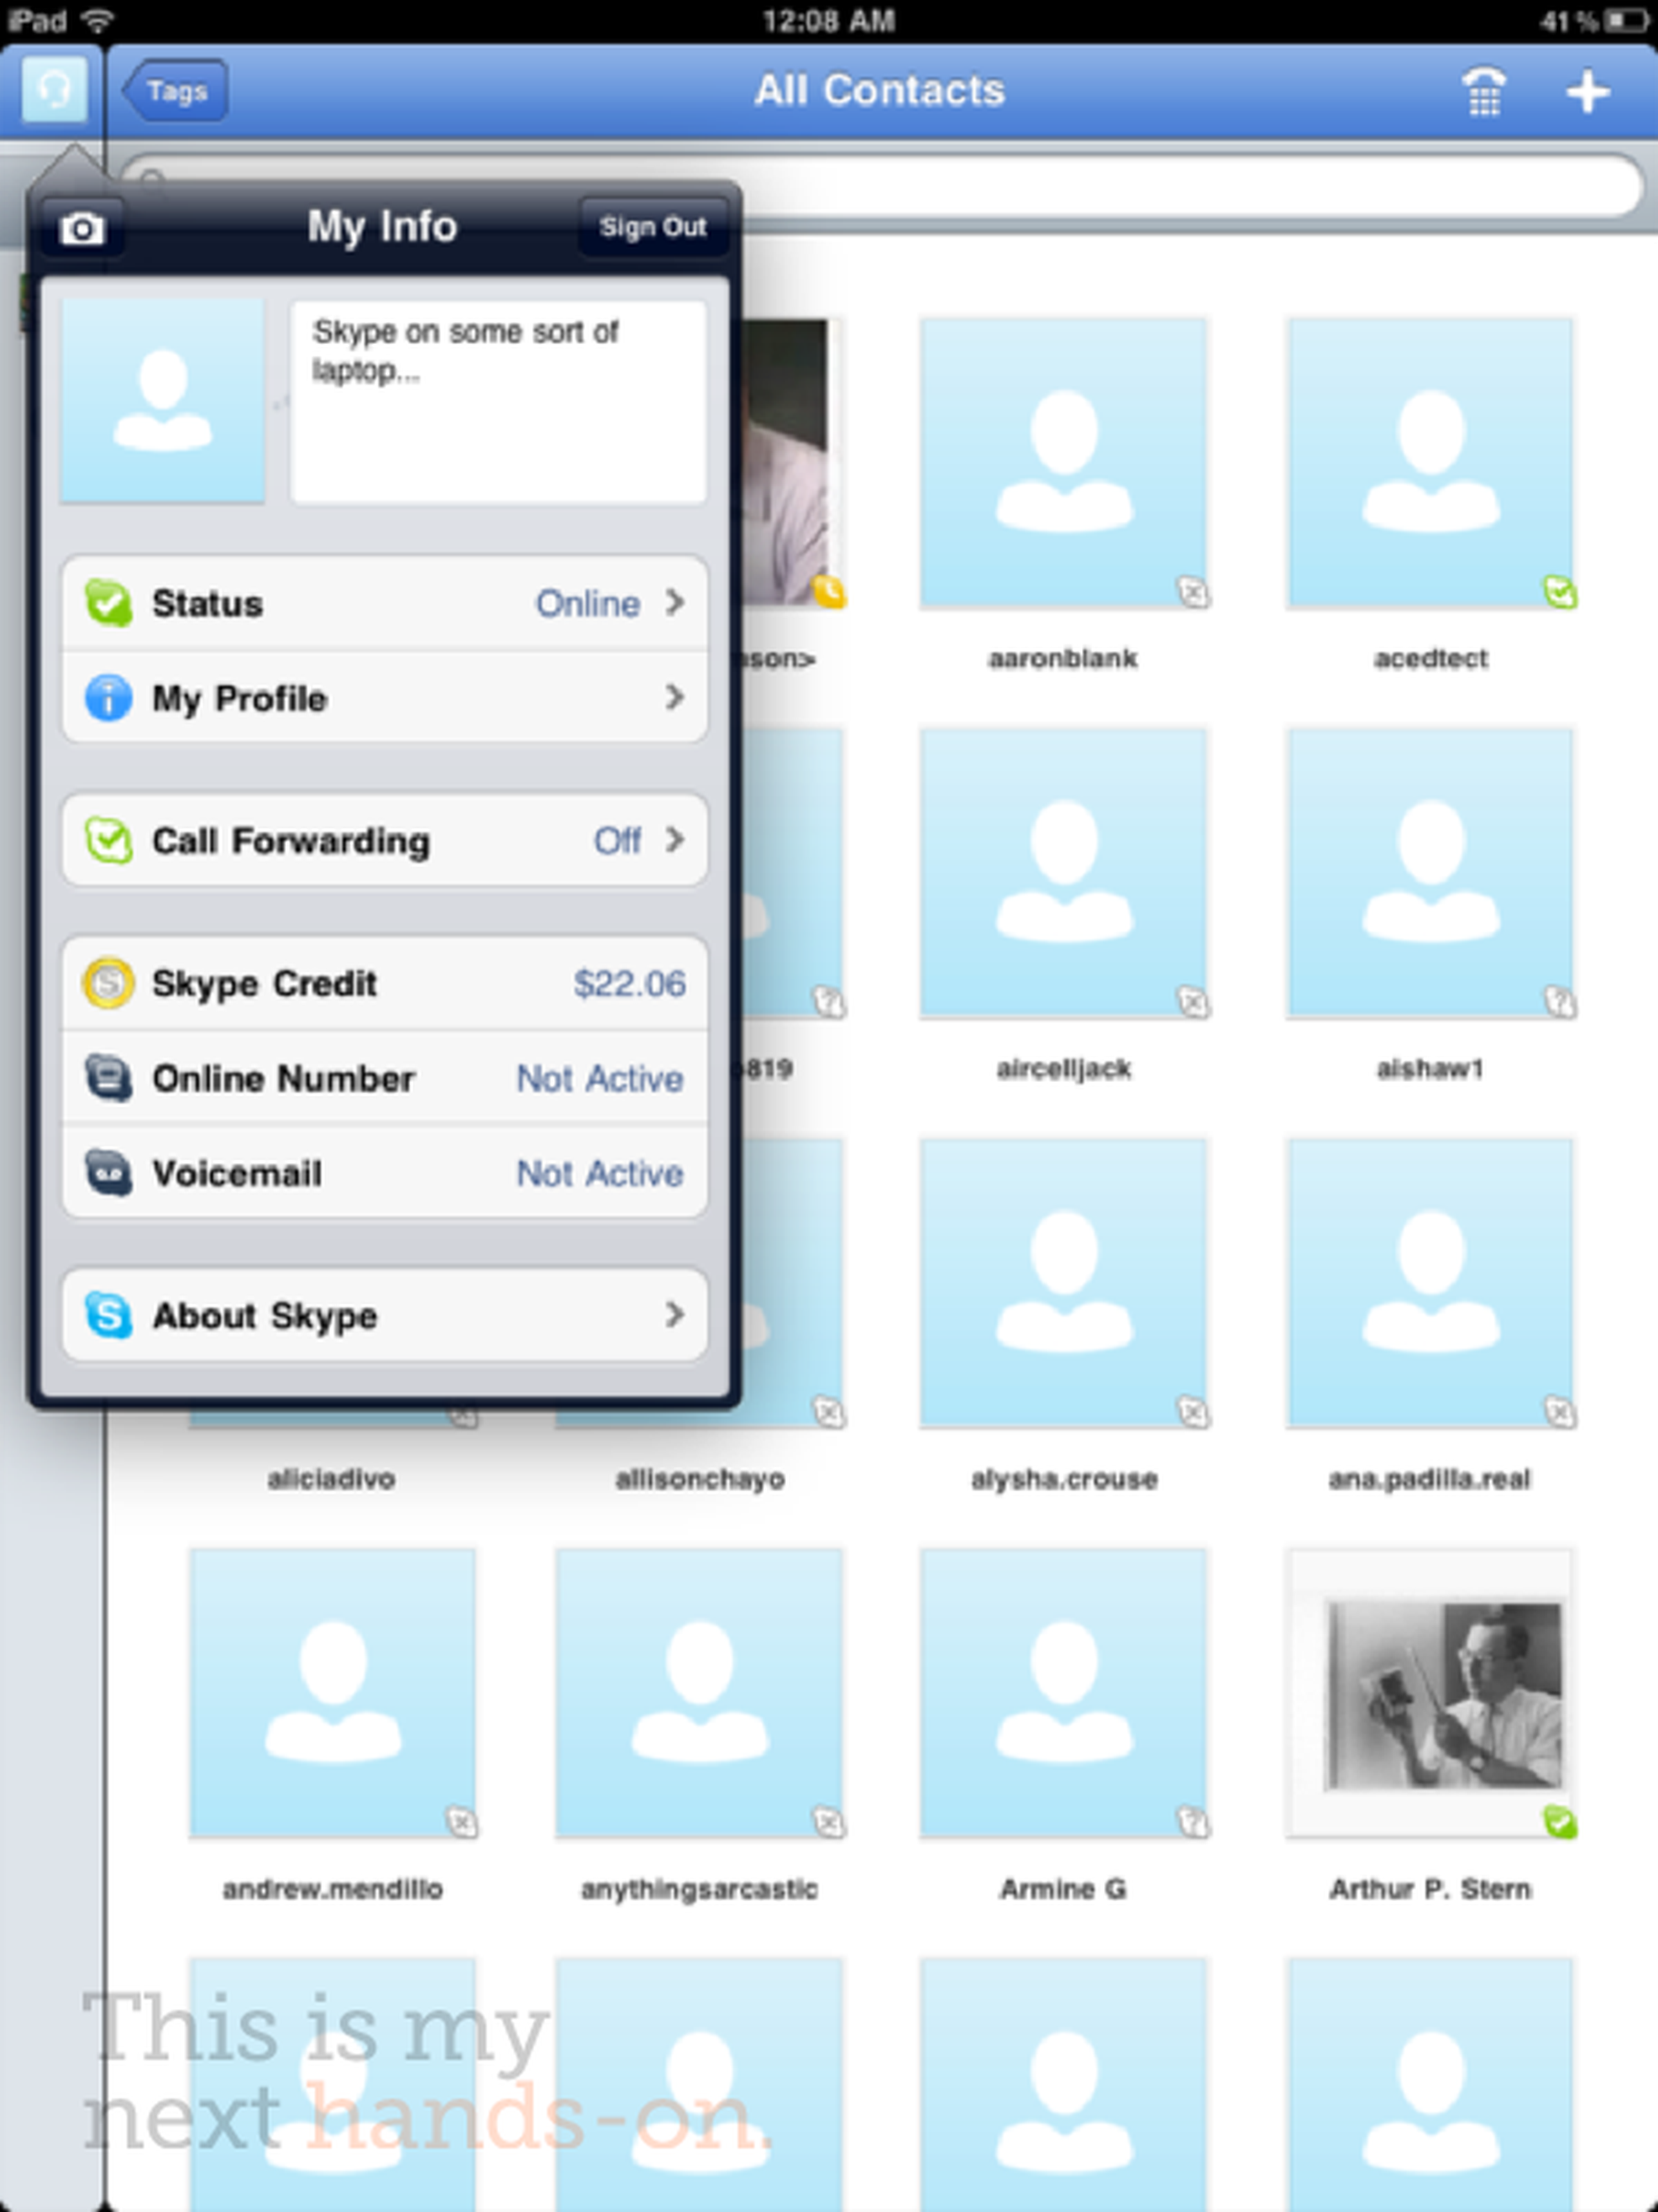 Skype for iPad released with video calling on WiFi and 3G